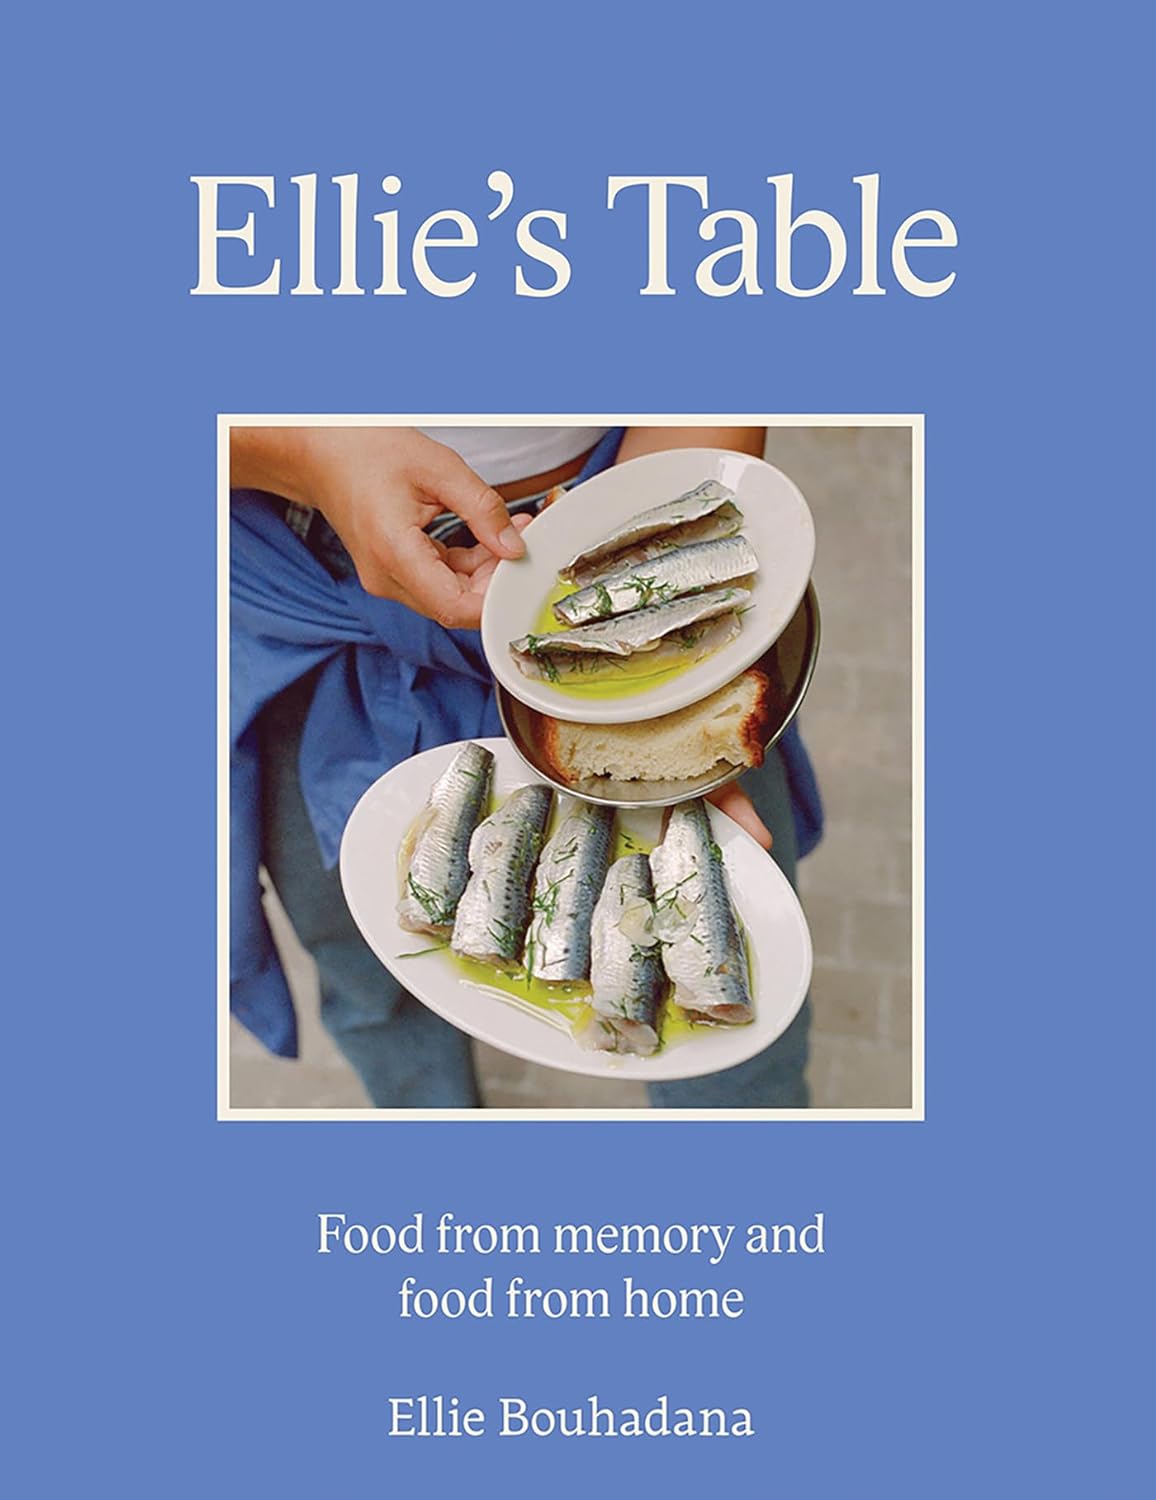 Ellie's Table: Food from memory and food from home (Ellie Bouhadana)